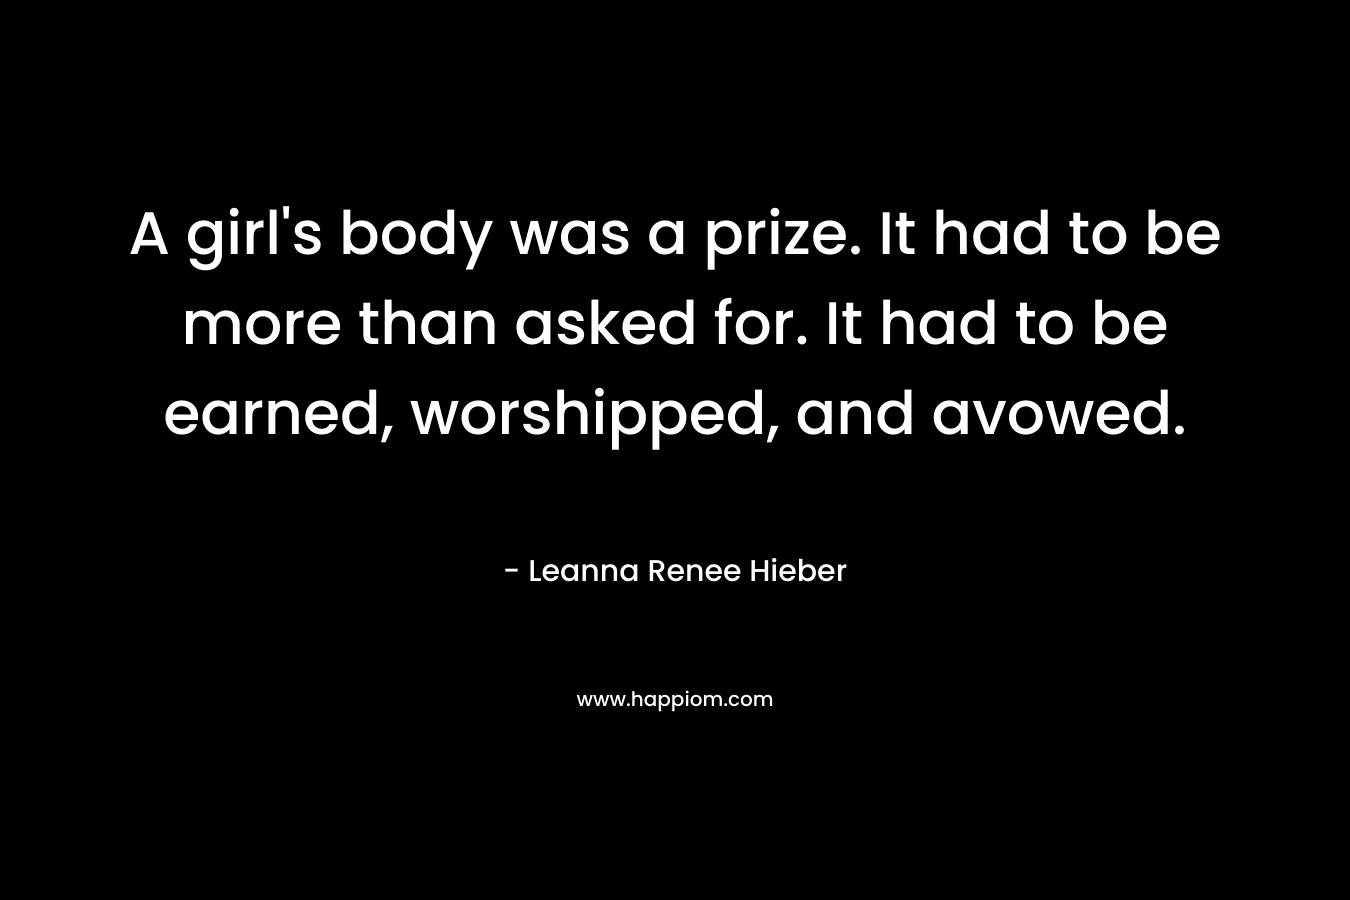 A girl’s body was a prize. It had to be more than asked for. It had to be earned, worshipped, and avowed. – Leanna Renee Hieber